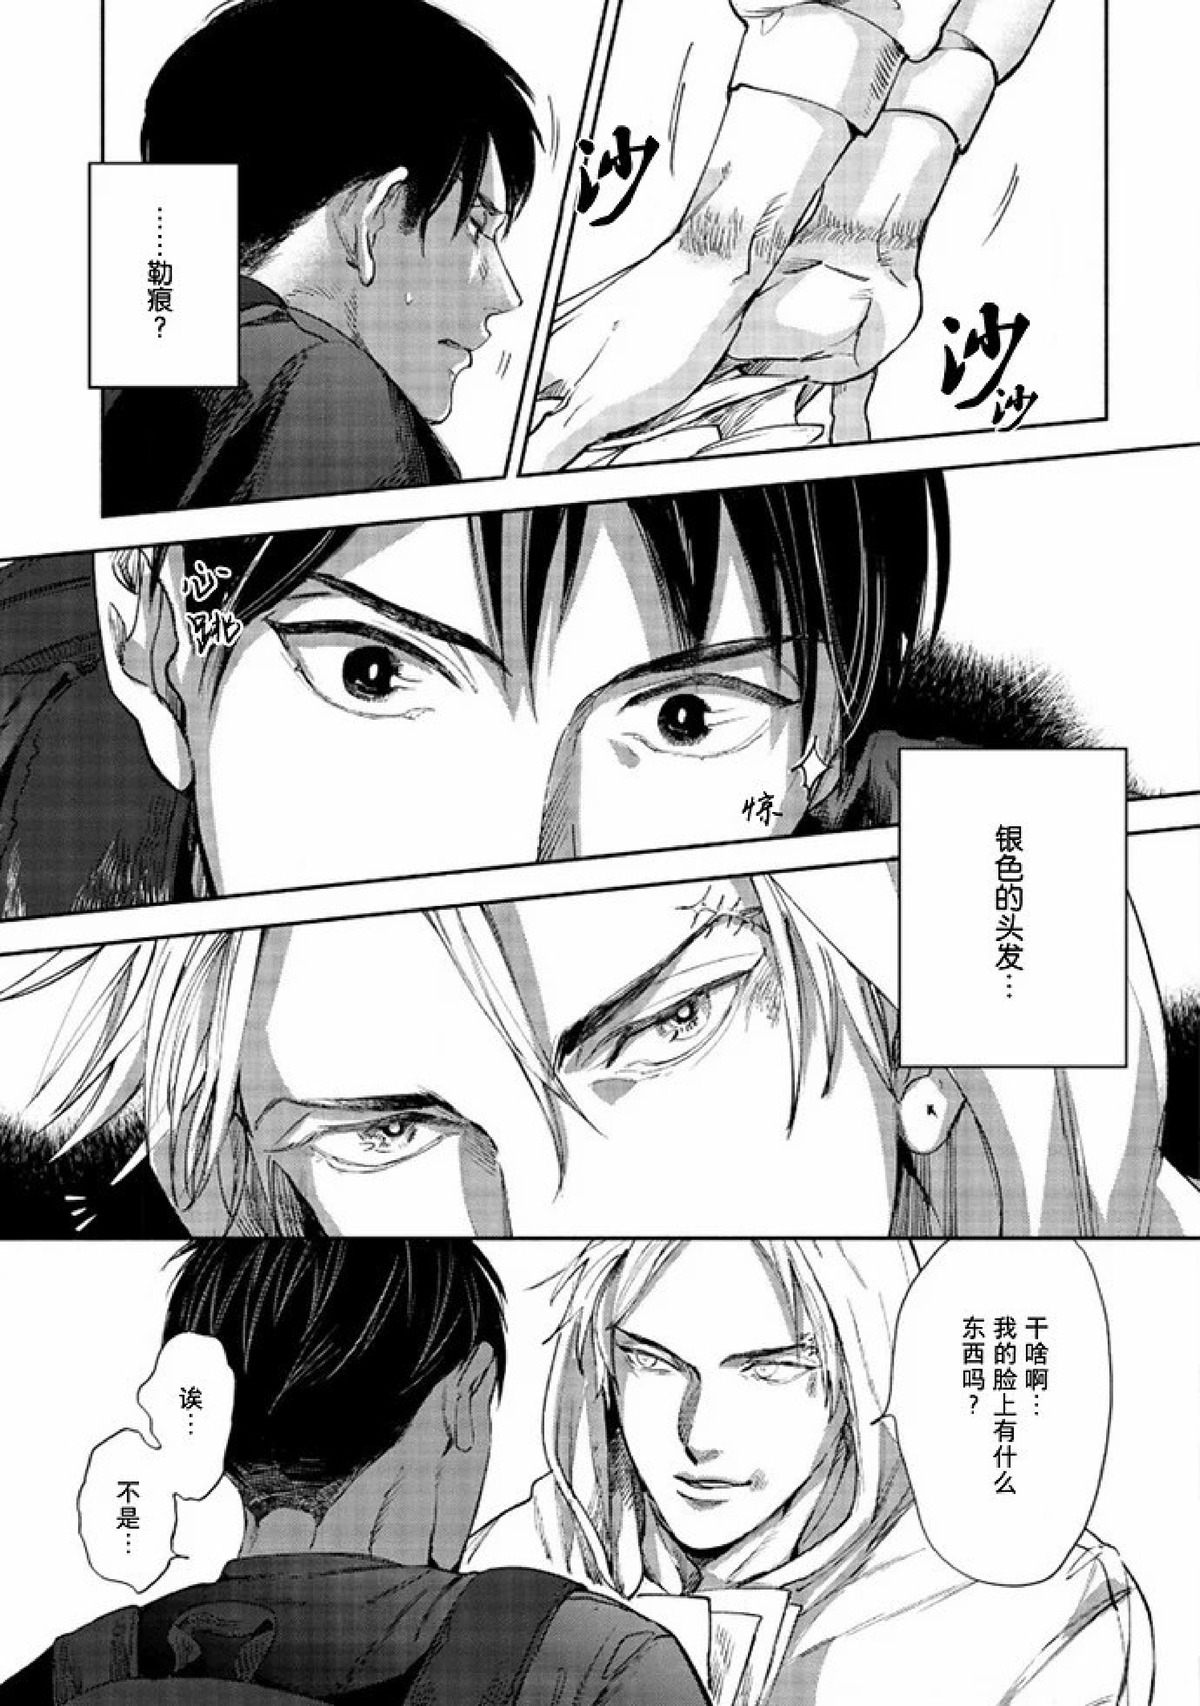 【Two sides of the same coin[腐漫]】漫画-（上卷01-02）章节漫画下拉式图片-35.jpg